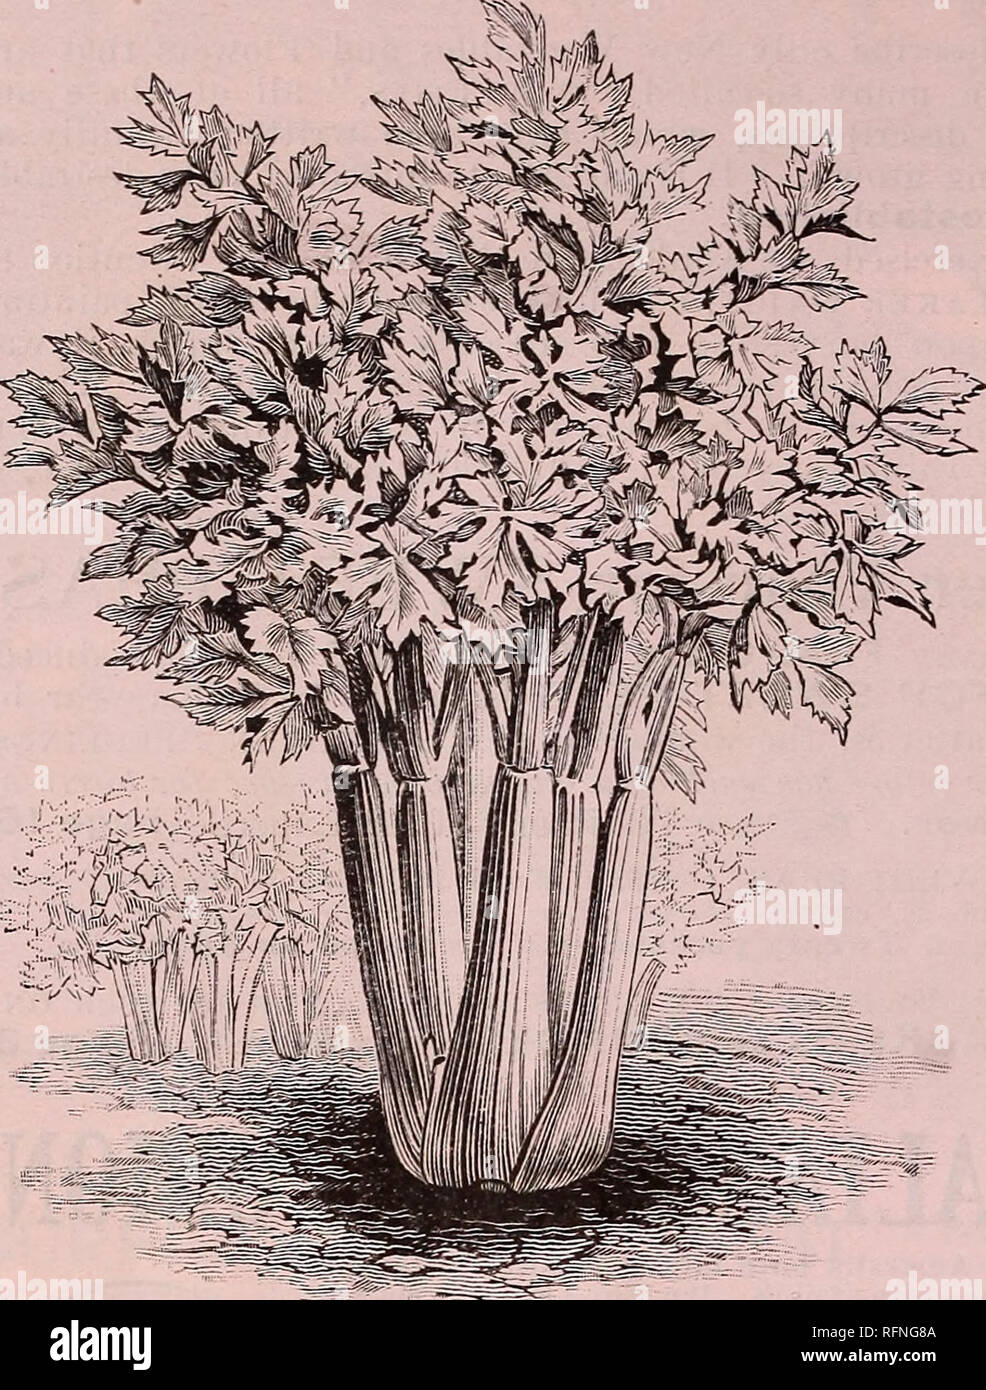 . Burpee's farm annual written at Fordhook Farm. Nurseries (Horticulture) Pennsylvania Philadelphia Catalogs; Vegetables Seeds Catalogs; Plants, Ornamental Catalogs; Flowers Seeds Catalogs. 6 W. ATLEE BURPEE &amp; CO., PHILADELPHIA. ROSE-RIBBED PARIS SELF-BLANCHING CELERY. The illustration herewith, together with the painting from nature on the back cover page, will give a fair idea of this most beautiful new Celery. Our customers will be anxious to secure this variety when we state that it is a sport of the Golden Self-Blanching Celery, de- scribed on page 37, and possesses all the good quali Stock Photo